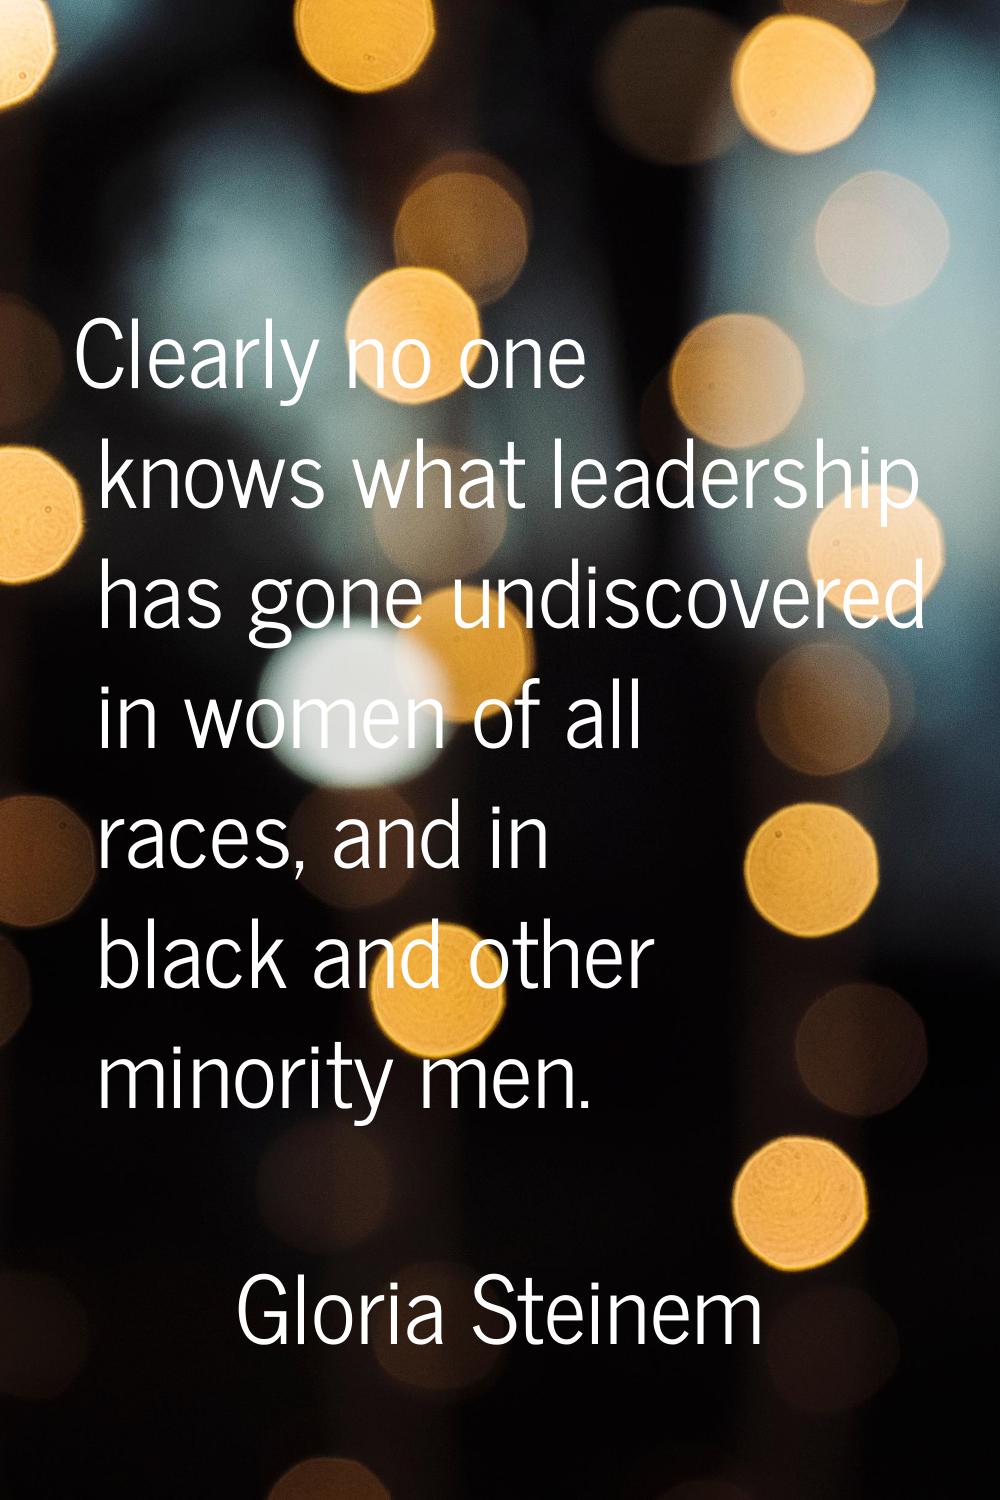 Clearly no one knows what leadership has gone undiscovered in women of all races, and in black and 